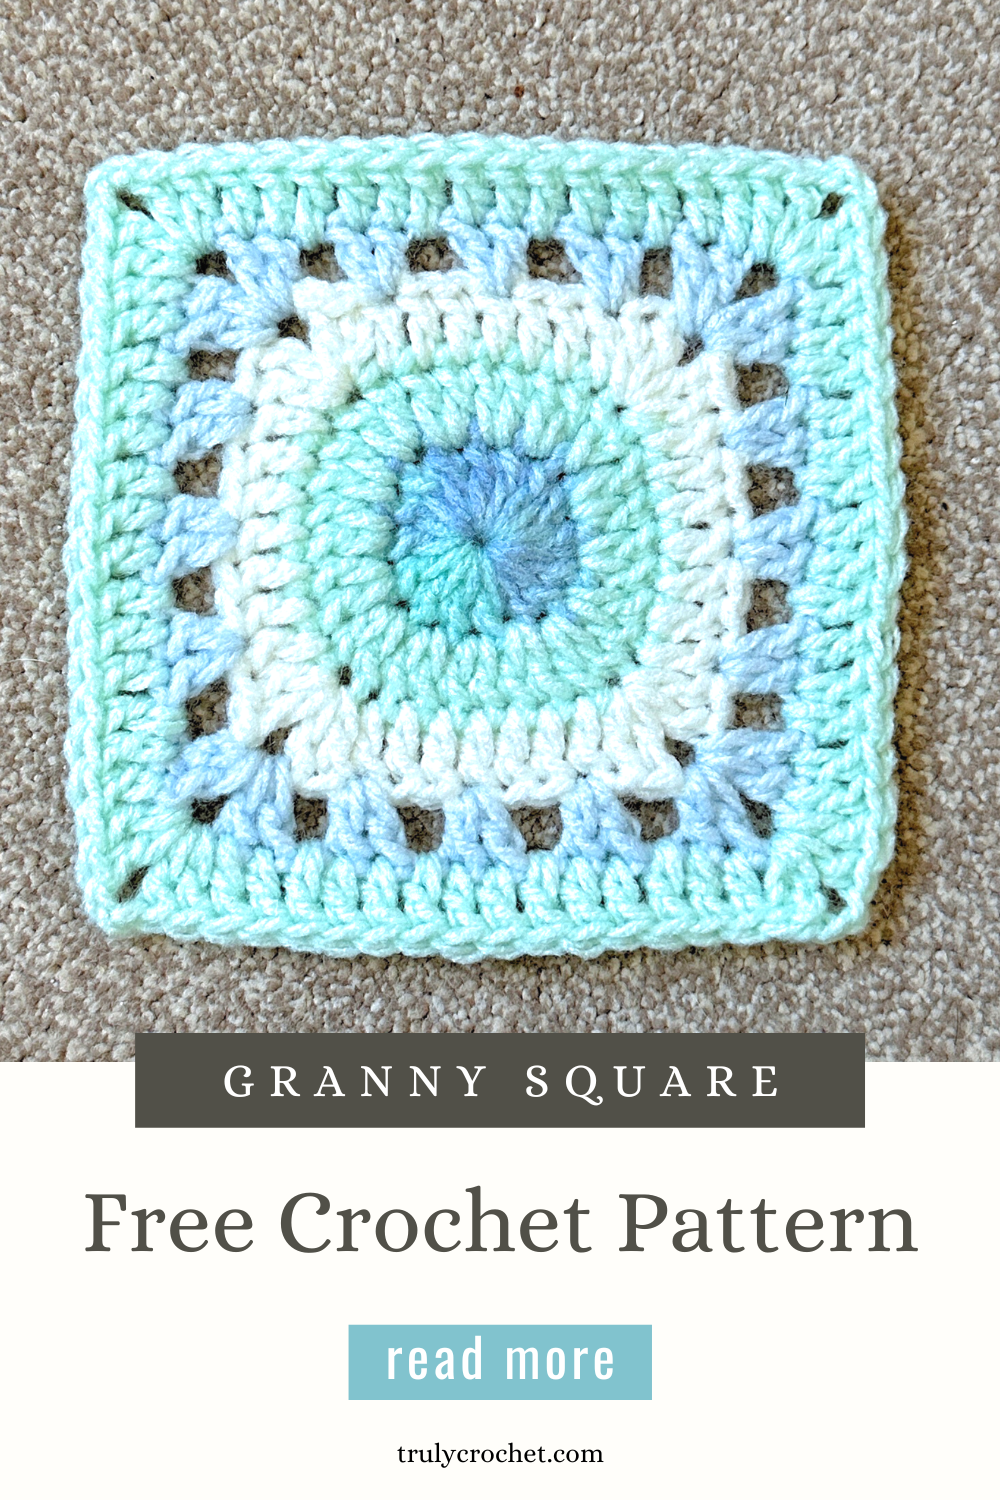 Blooming Granny Square - Free Crochet Pattern